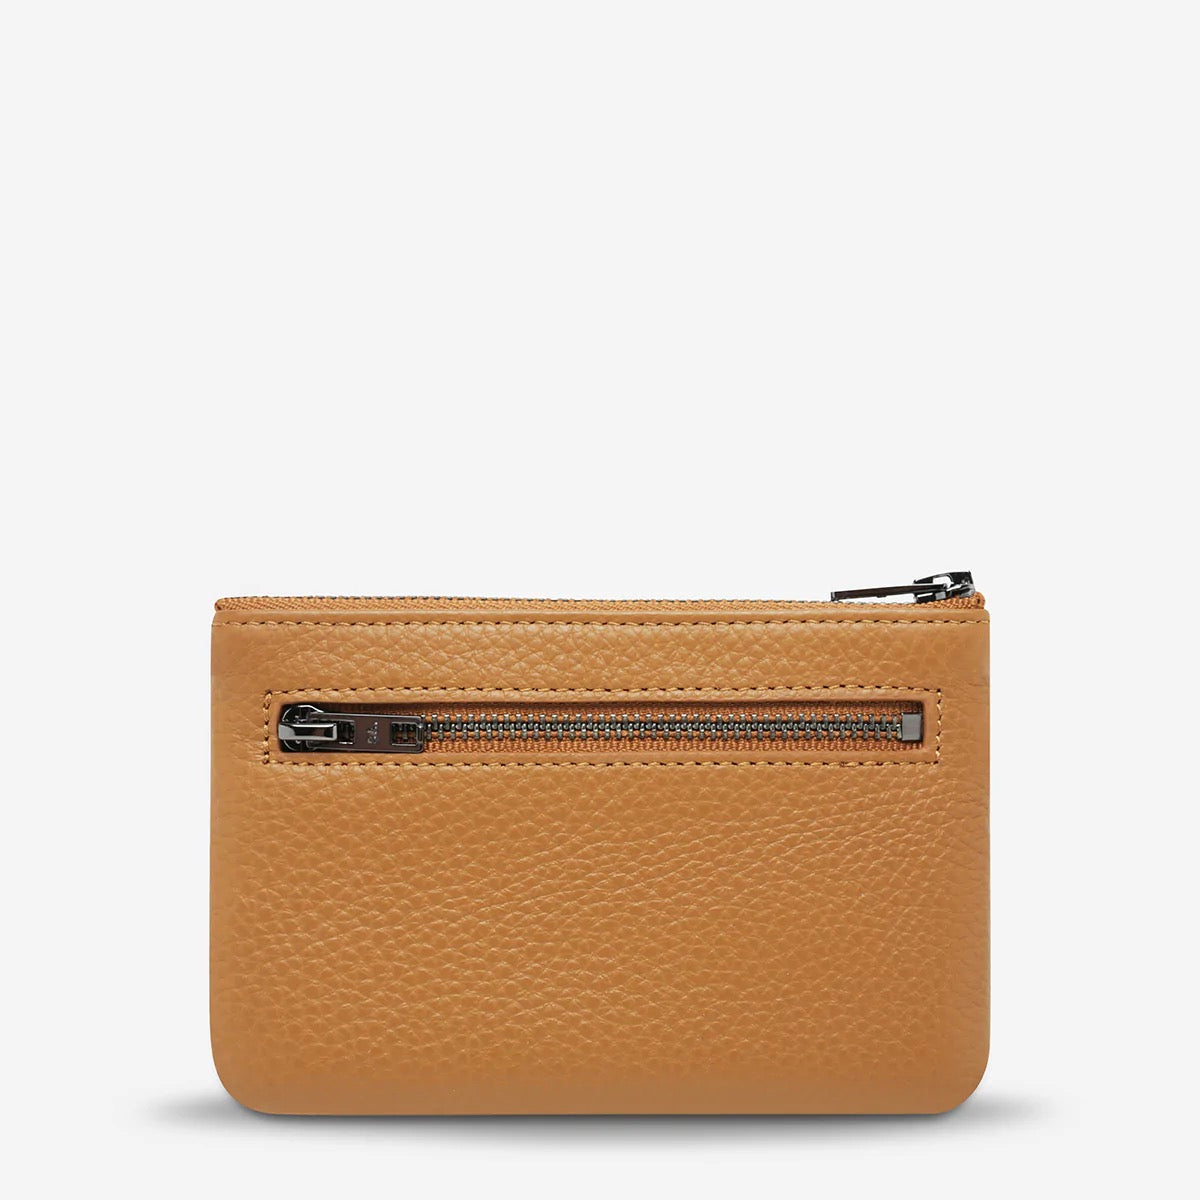 Status Anxiety - Change It All Wallet - Tan